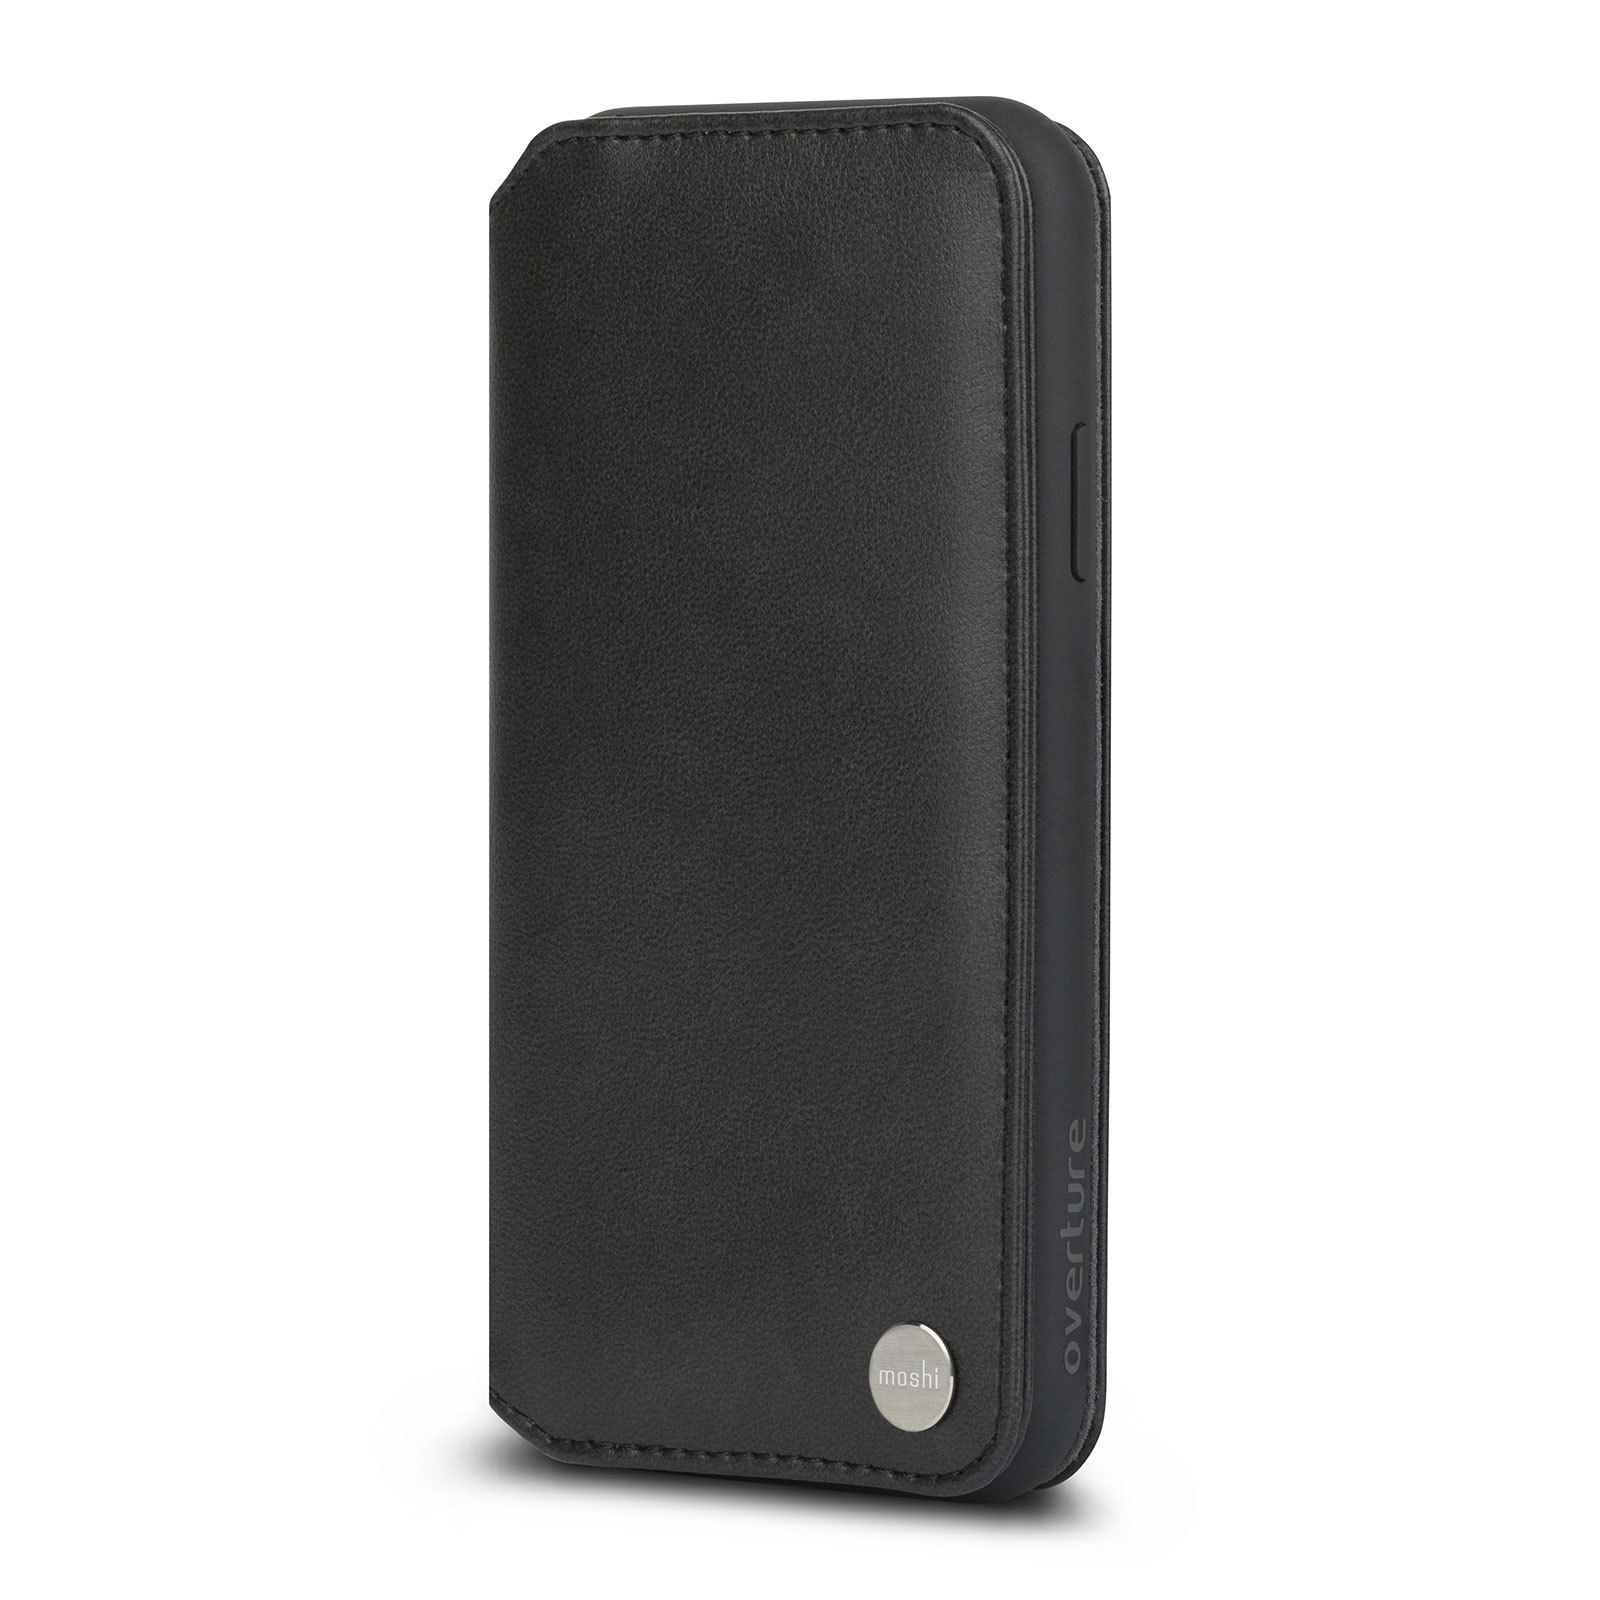 Moshi Overture Premium Protective Wallet Case for  Model iPhone XR -  Black - $39.99